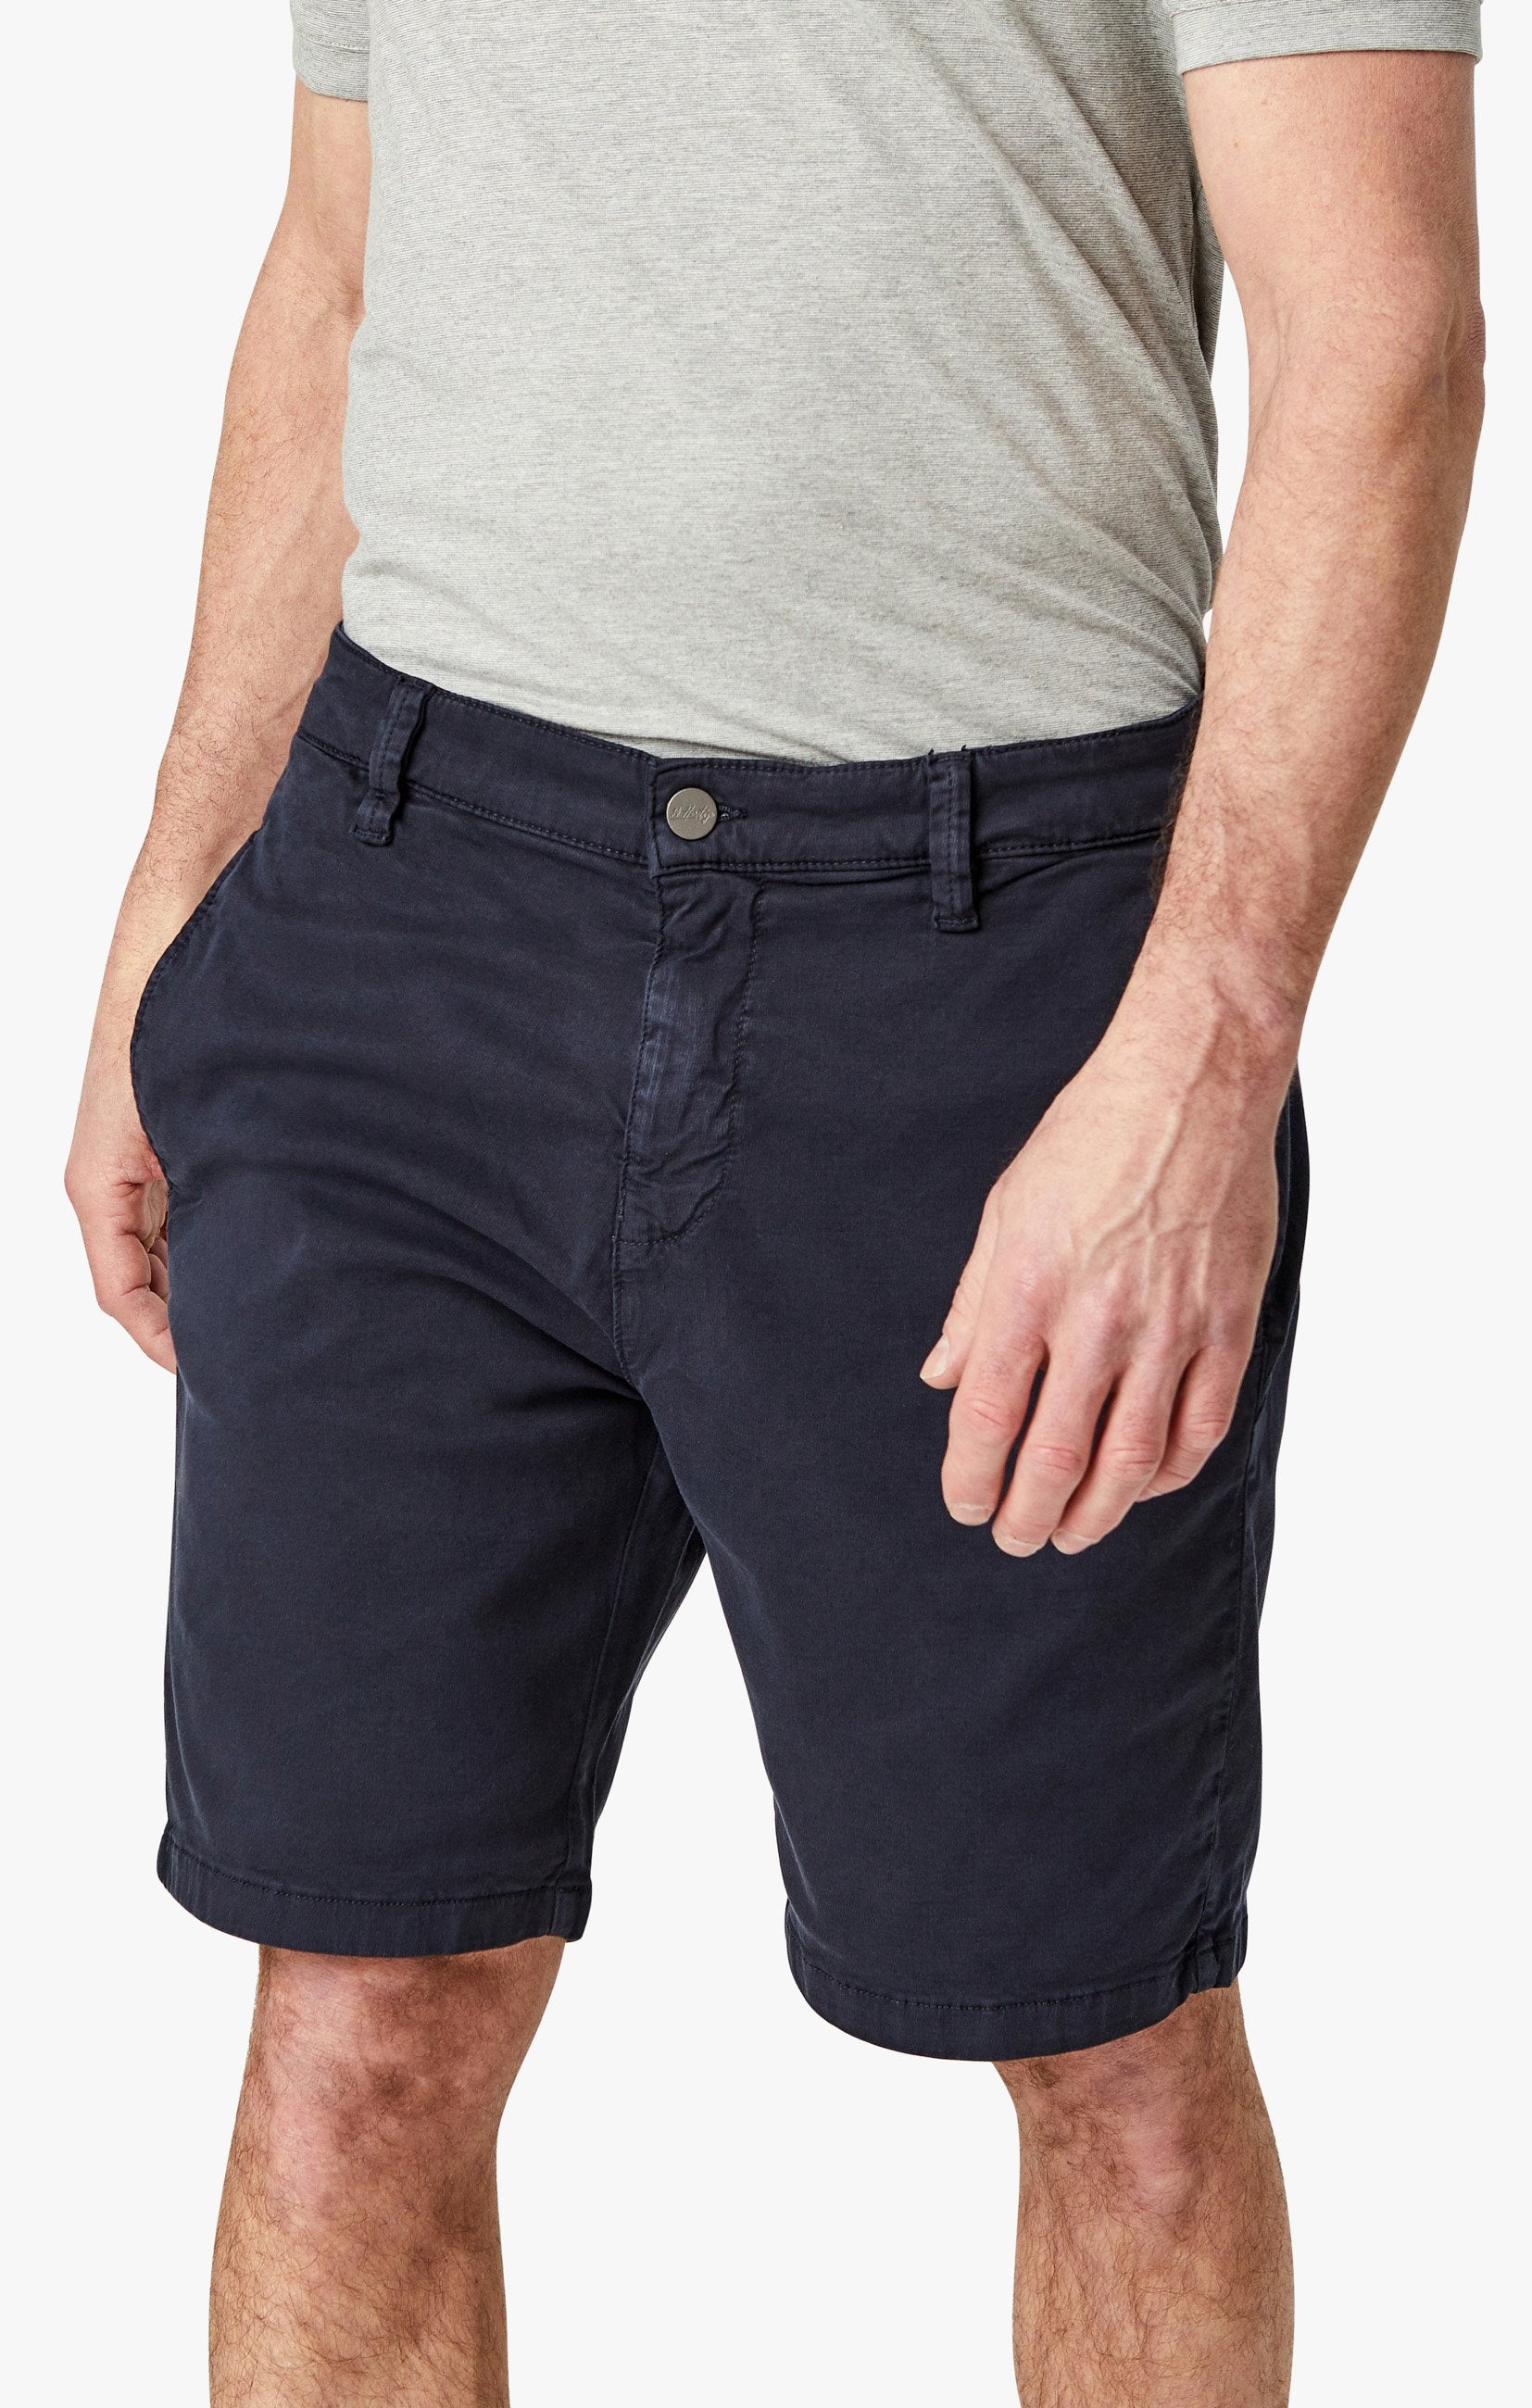 Nevada Shorts In Navy Soft Touch Image 4